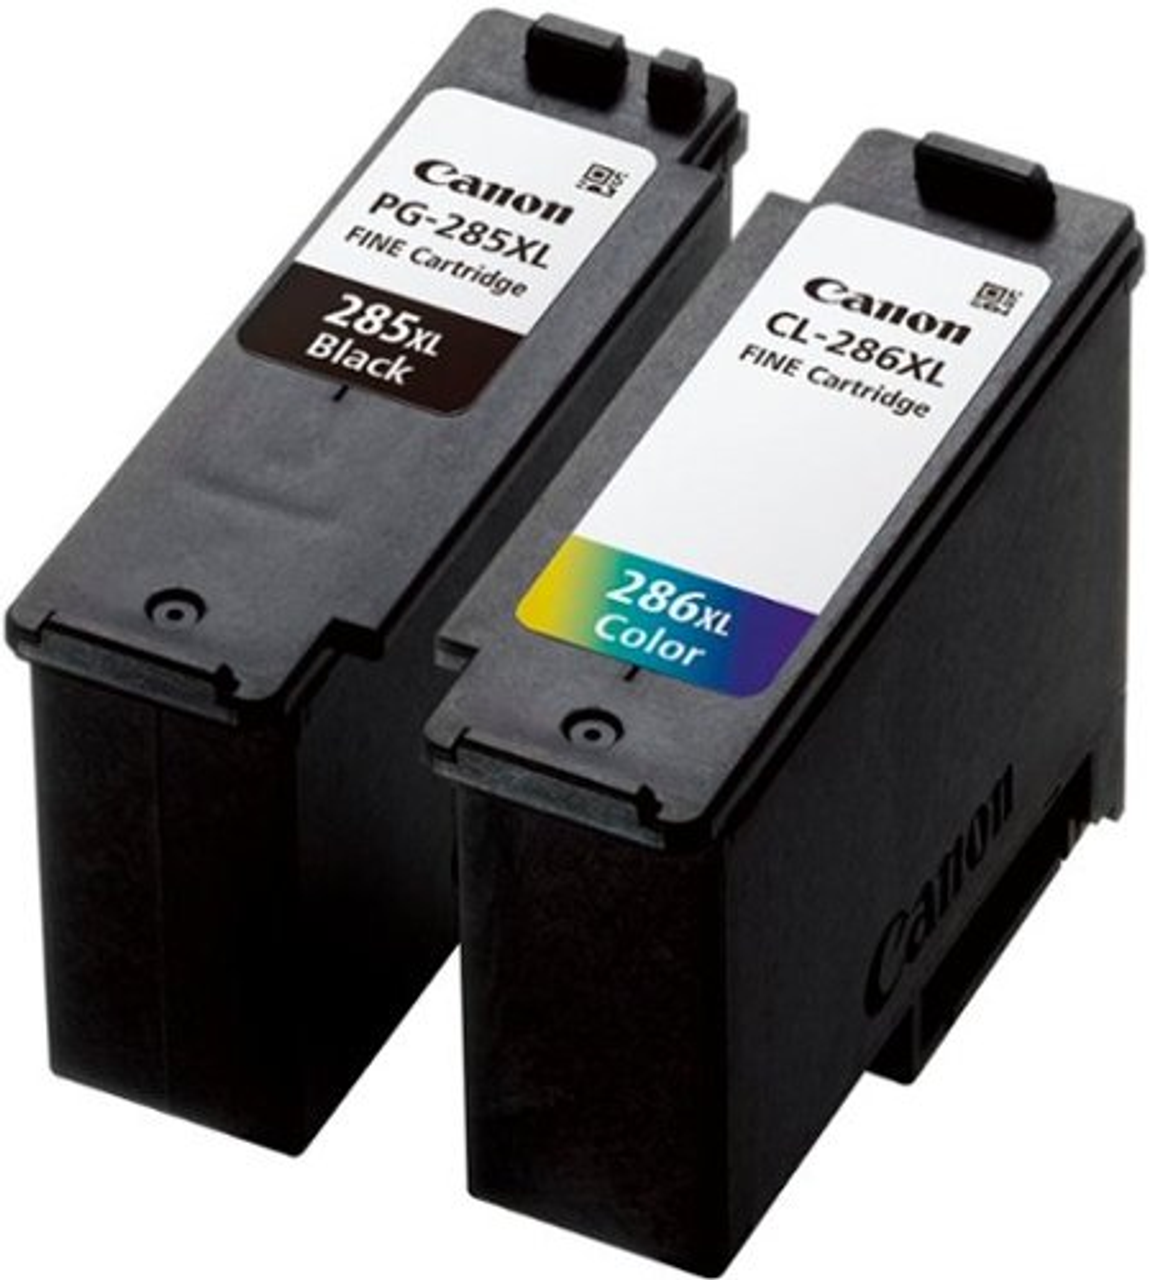 Canon - PG-285XL / CL-286XL 2-Pack High Yield Ink Cartridges - Black & Tri-Color